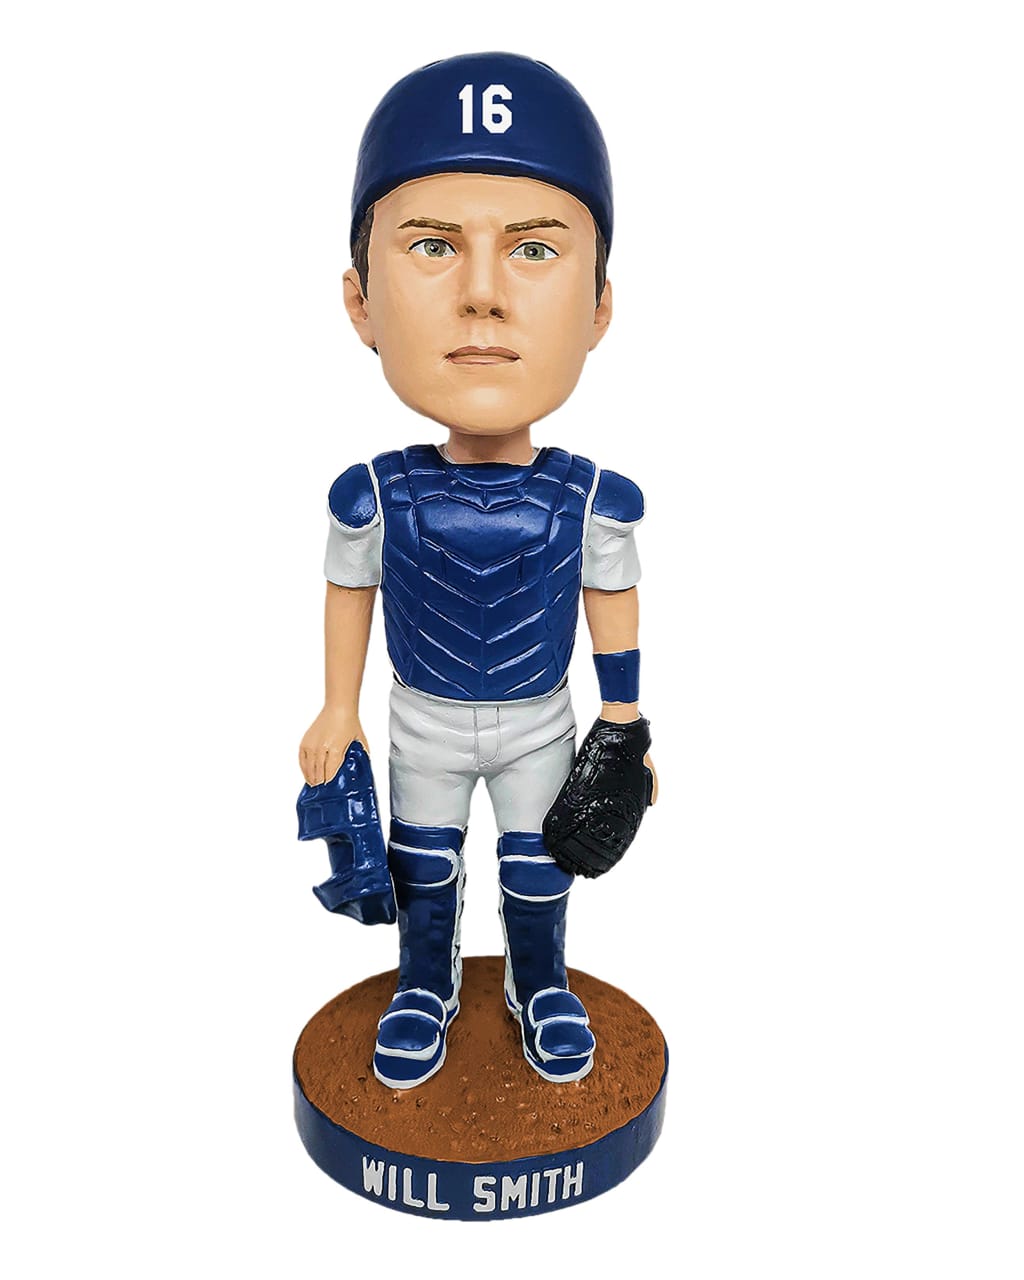 FOCO launches eight collectible MLB AllStar bobbleheads  pennlivecom